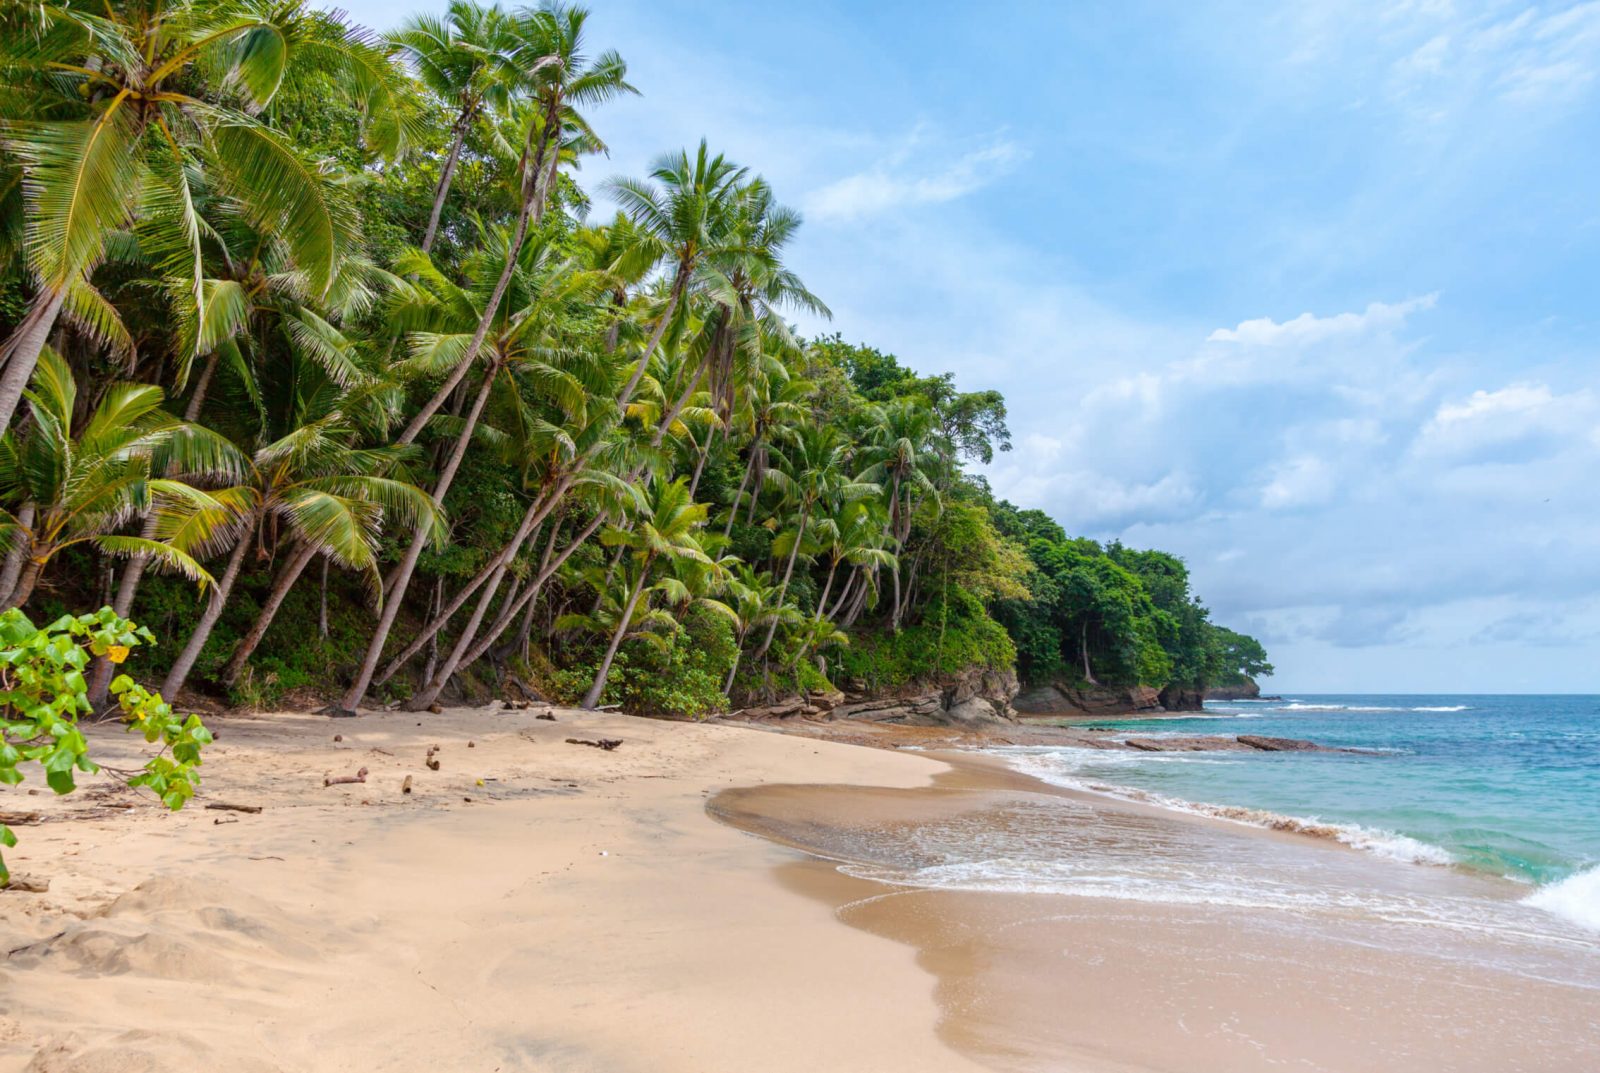 Here’s why Sri Lanka Ranks as Lonely Planet’s Top Country to Visit in 2019